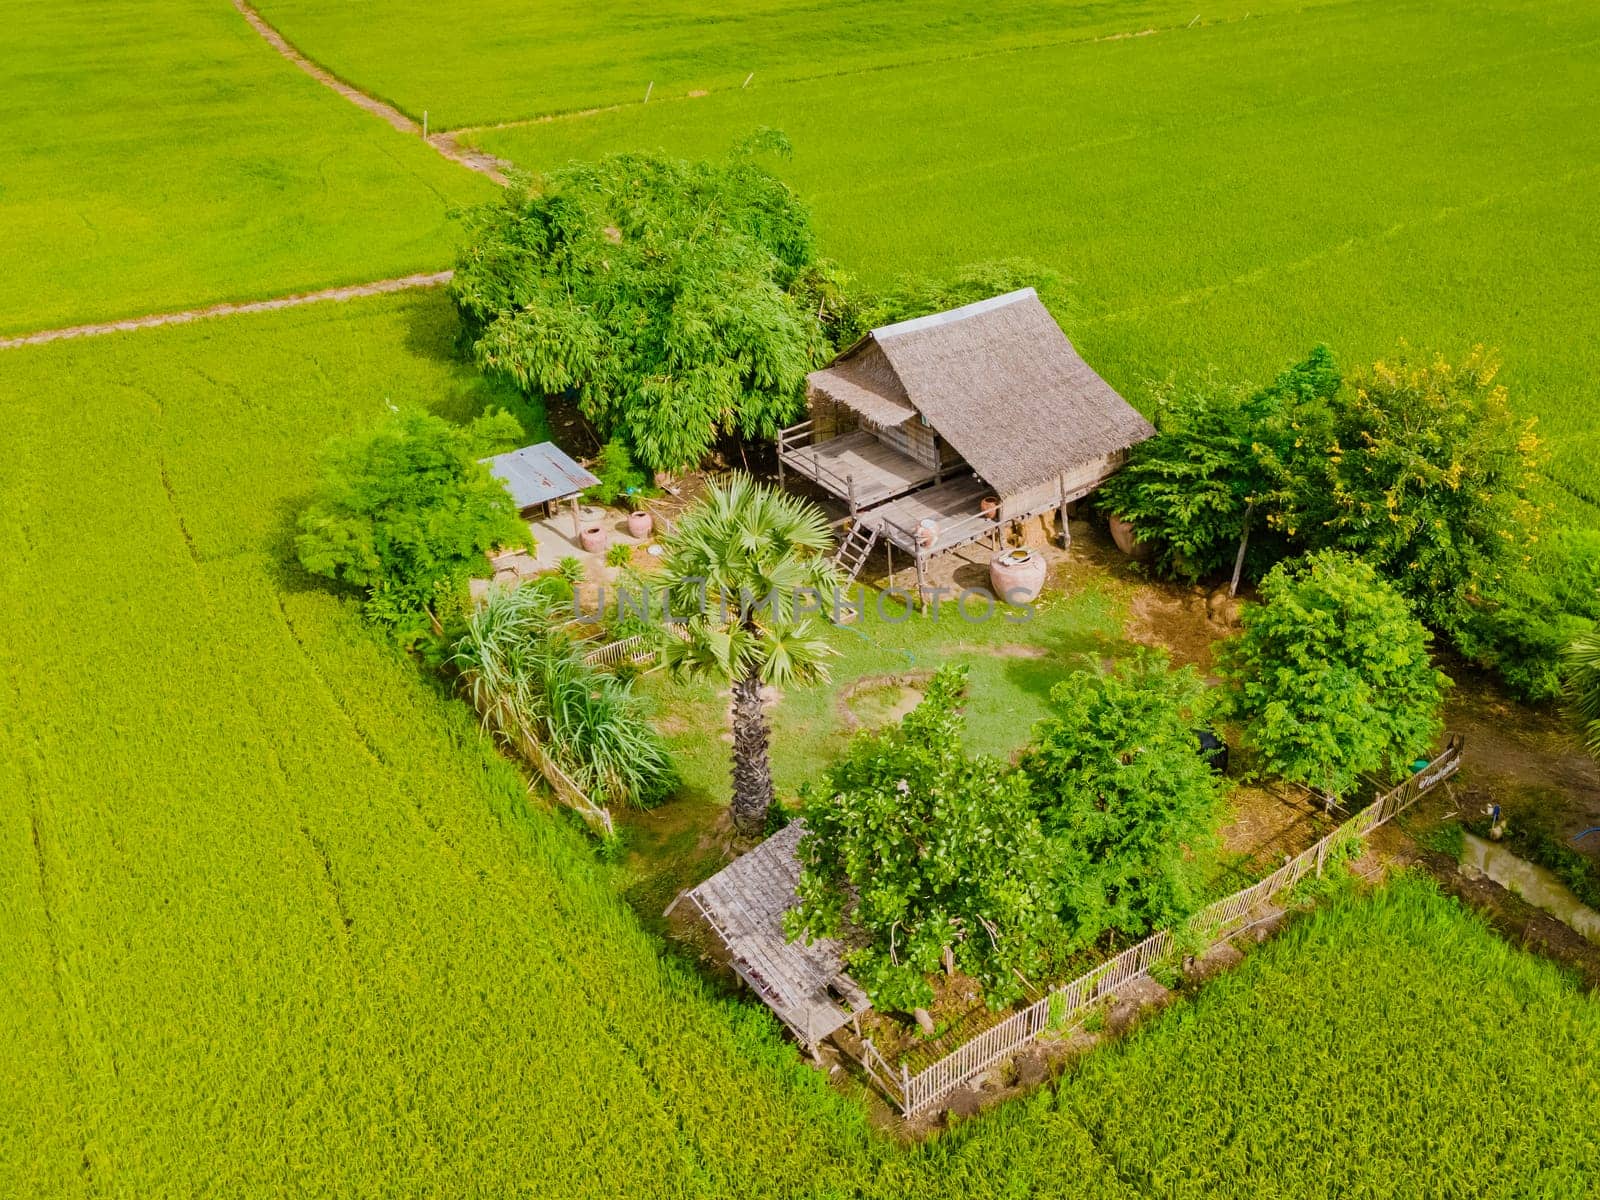 Bamboo hut homestay farm with Green rice paddy fields in Central Thailand Suphanburi region, top view drone aerial view of green rice fields in Thailand